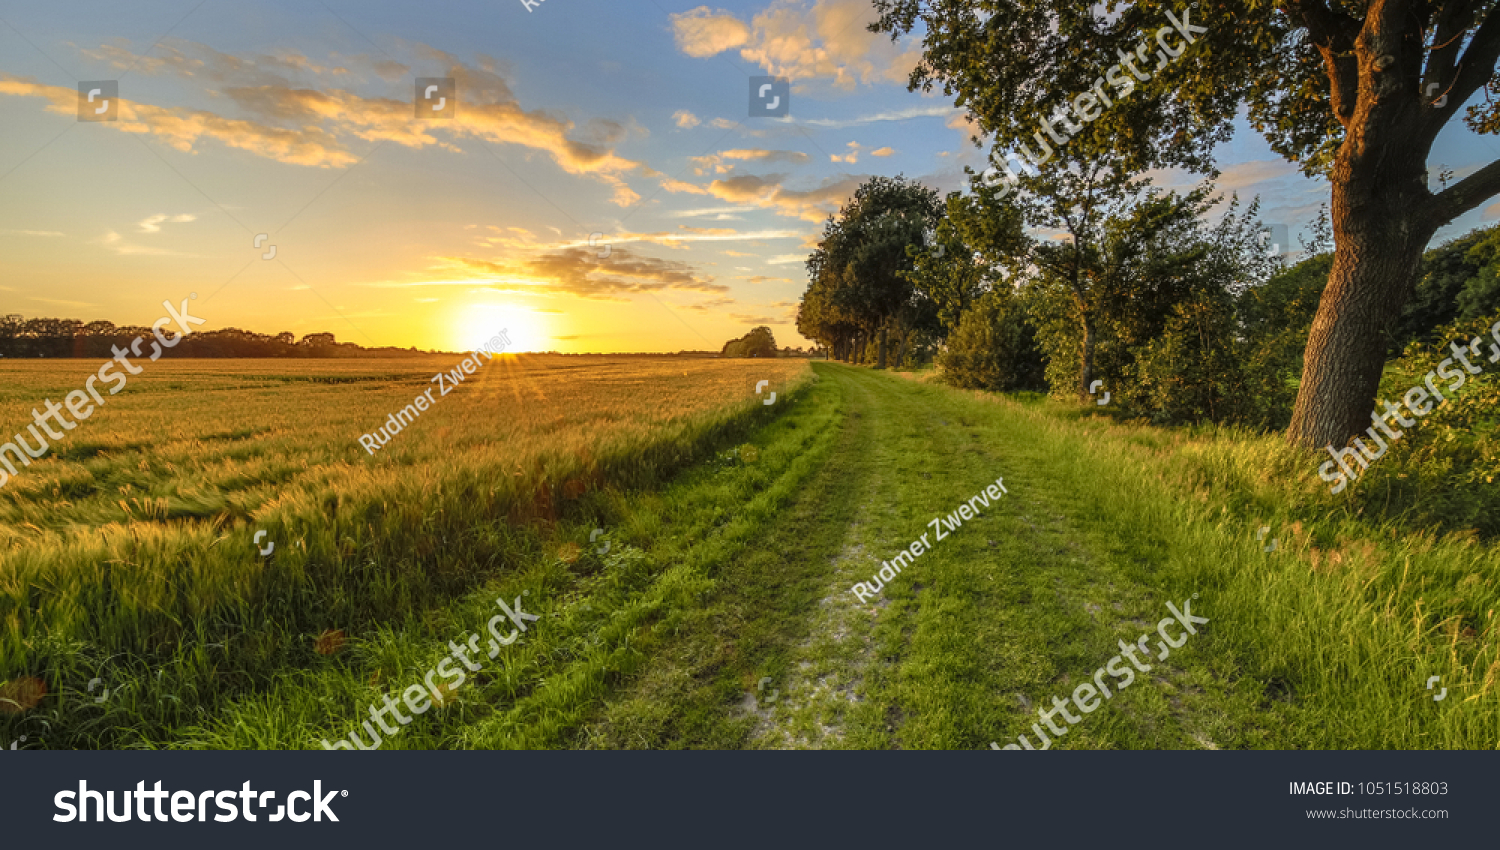 Wheat field along old oak track at sunset on Dutch countryside #1051518803